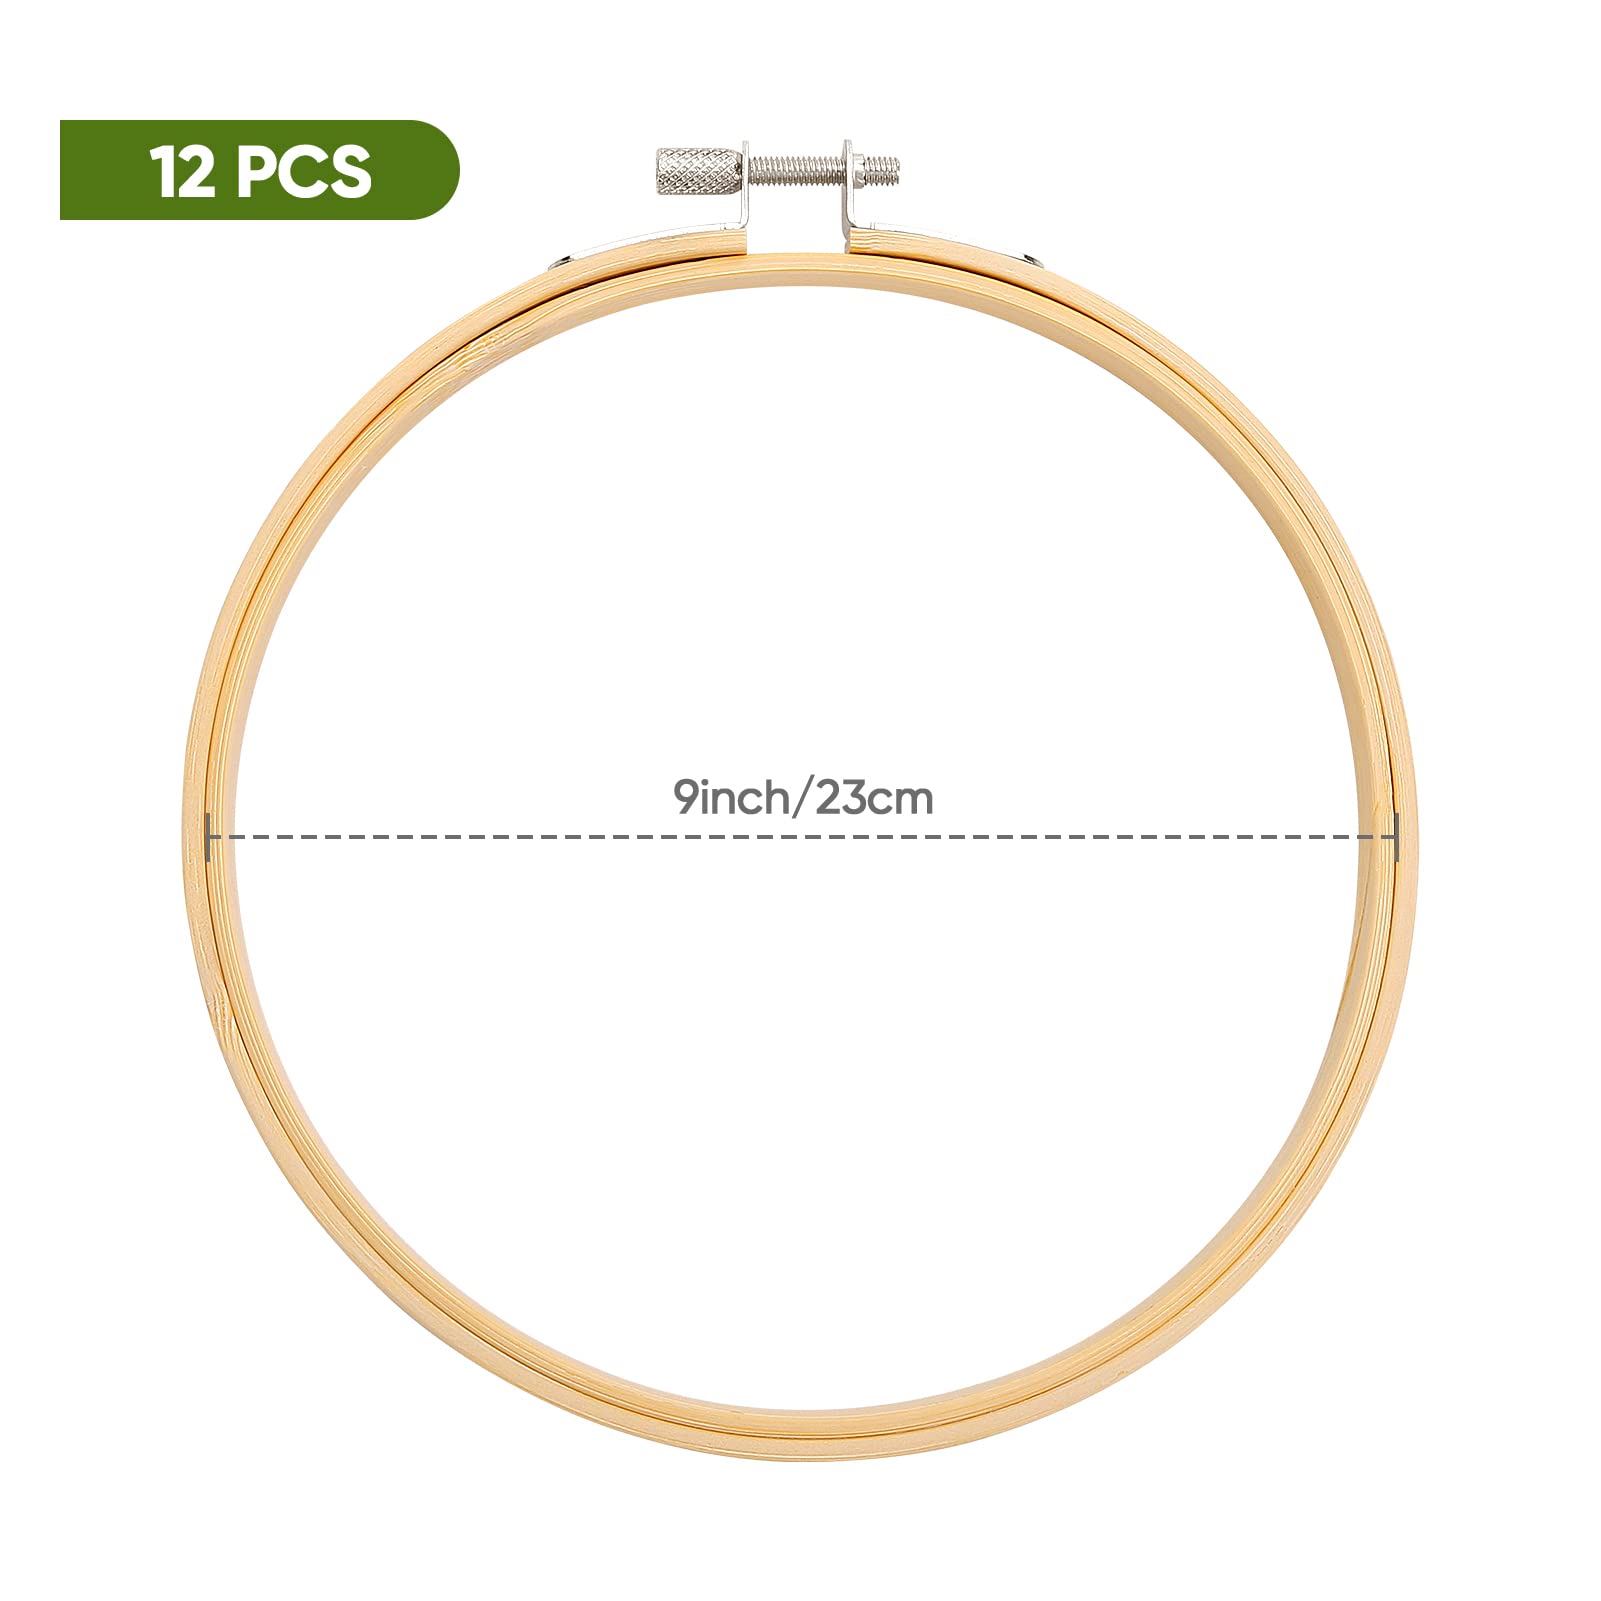 Caydo 12 Pieces 9 Inch Wooden Round Embroidery Hoops